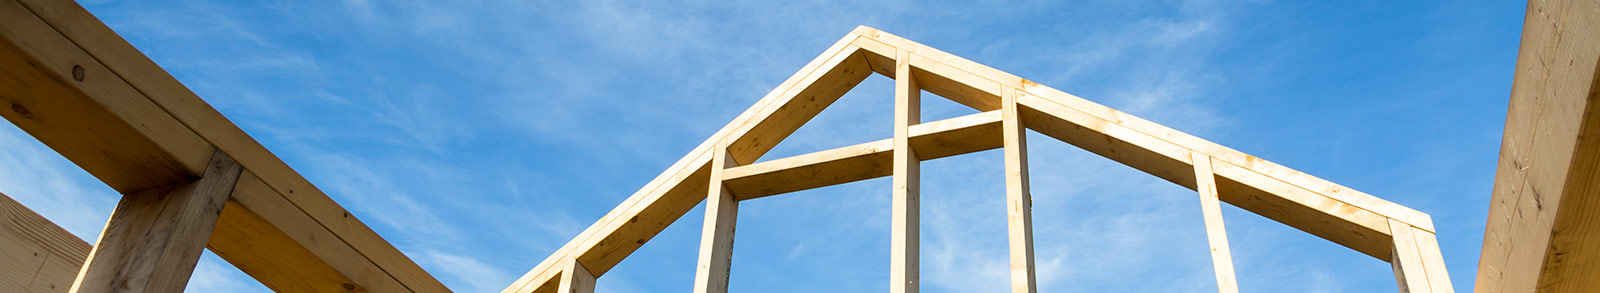 A house frame of wooden in front of blue clear sky